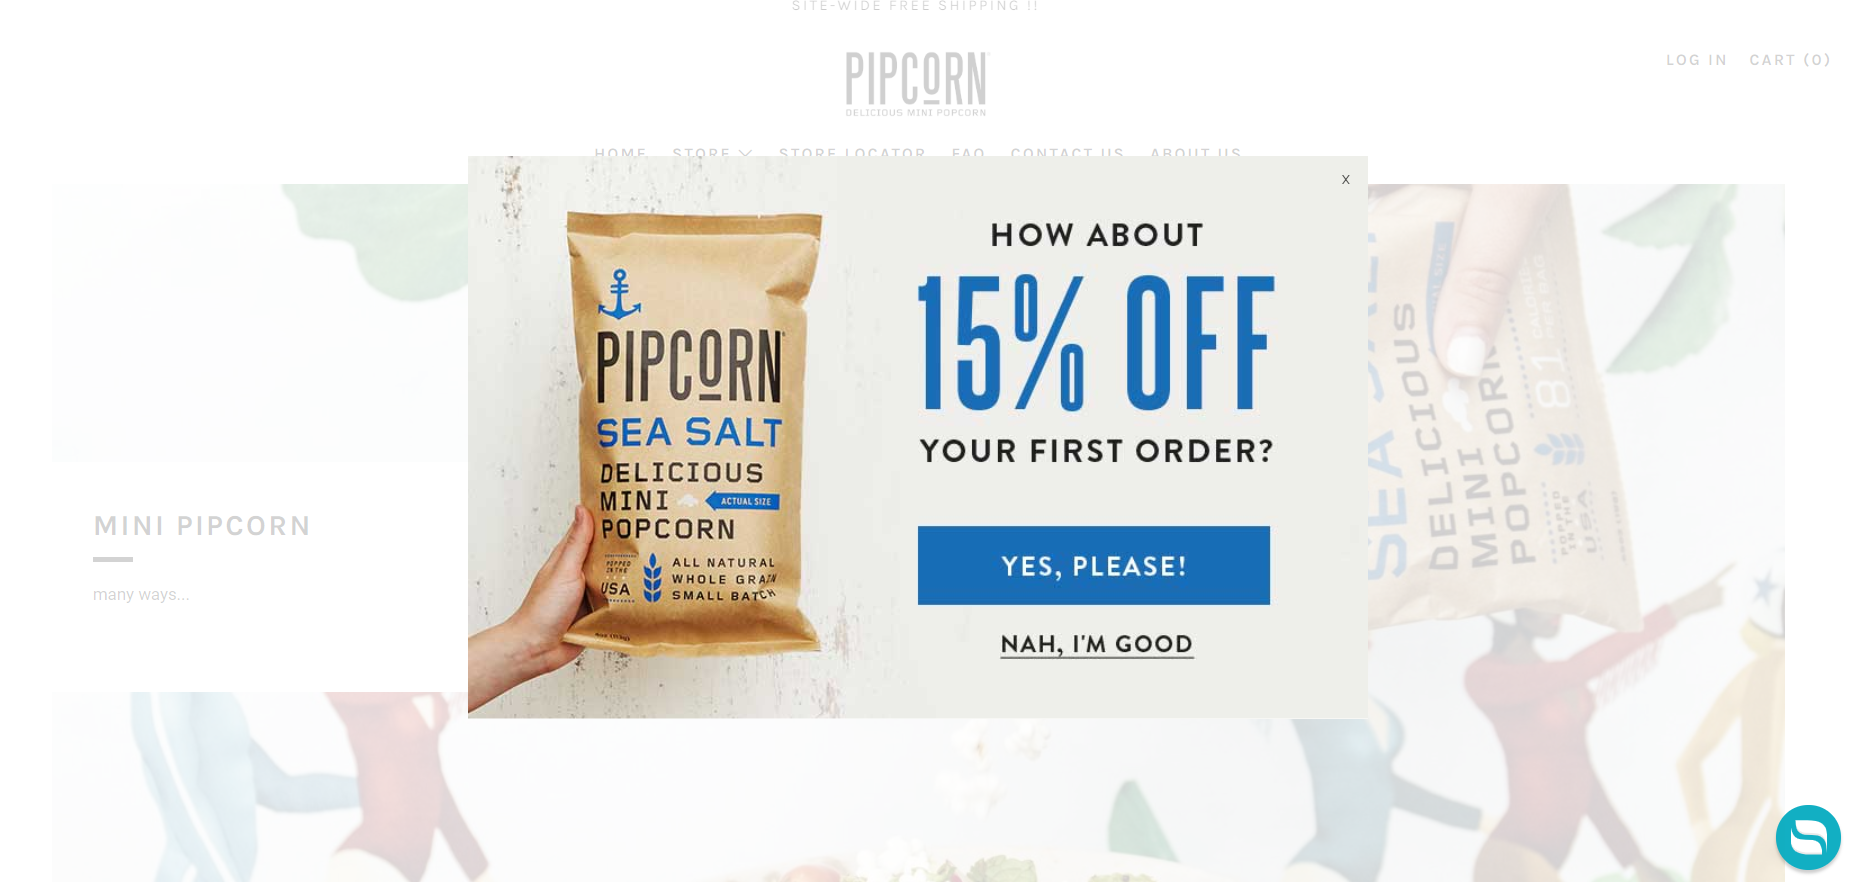 A screenshot from Pipcorn's online store showing a pop-up offering 15% off.